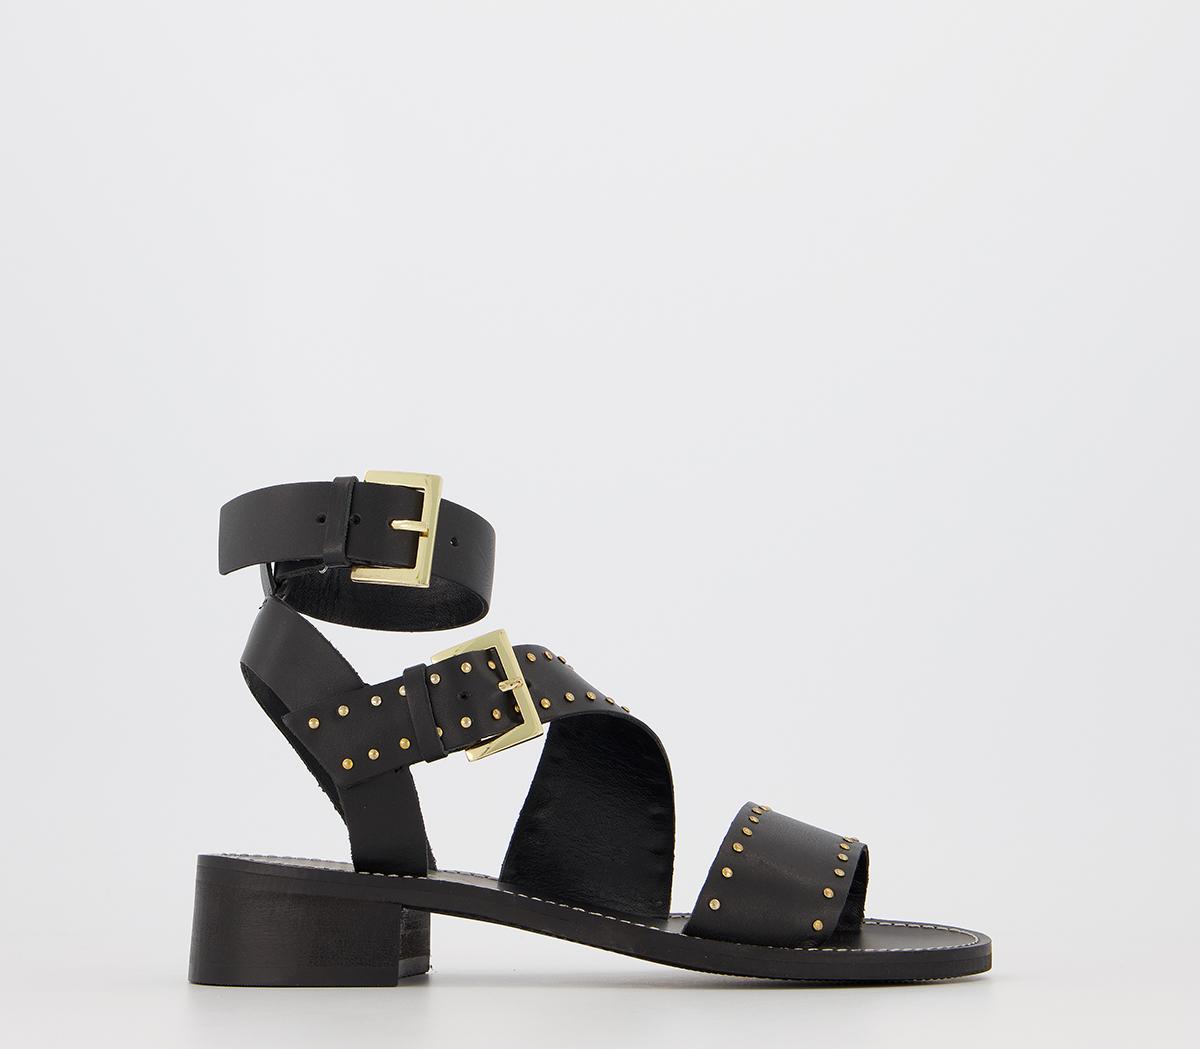 OFFICESailing Buckle SandalsBlack Leather With Gold Studs